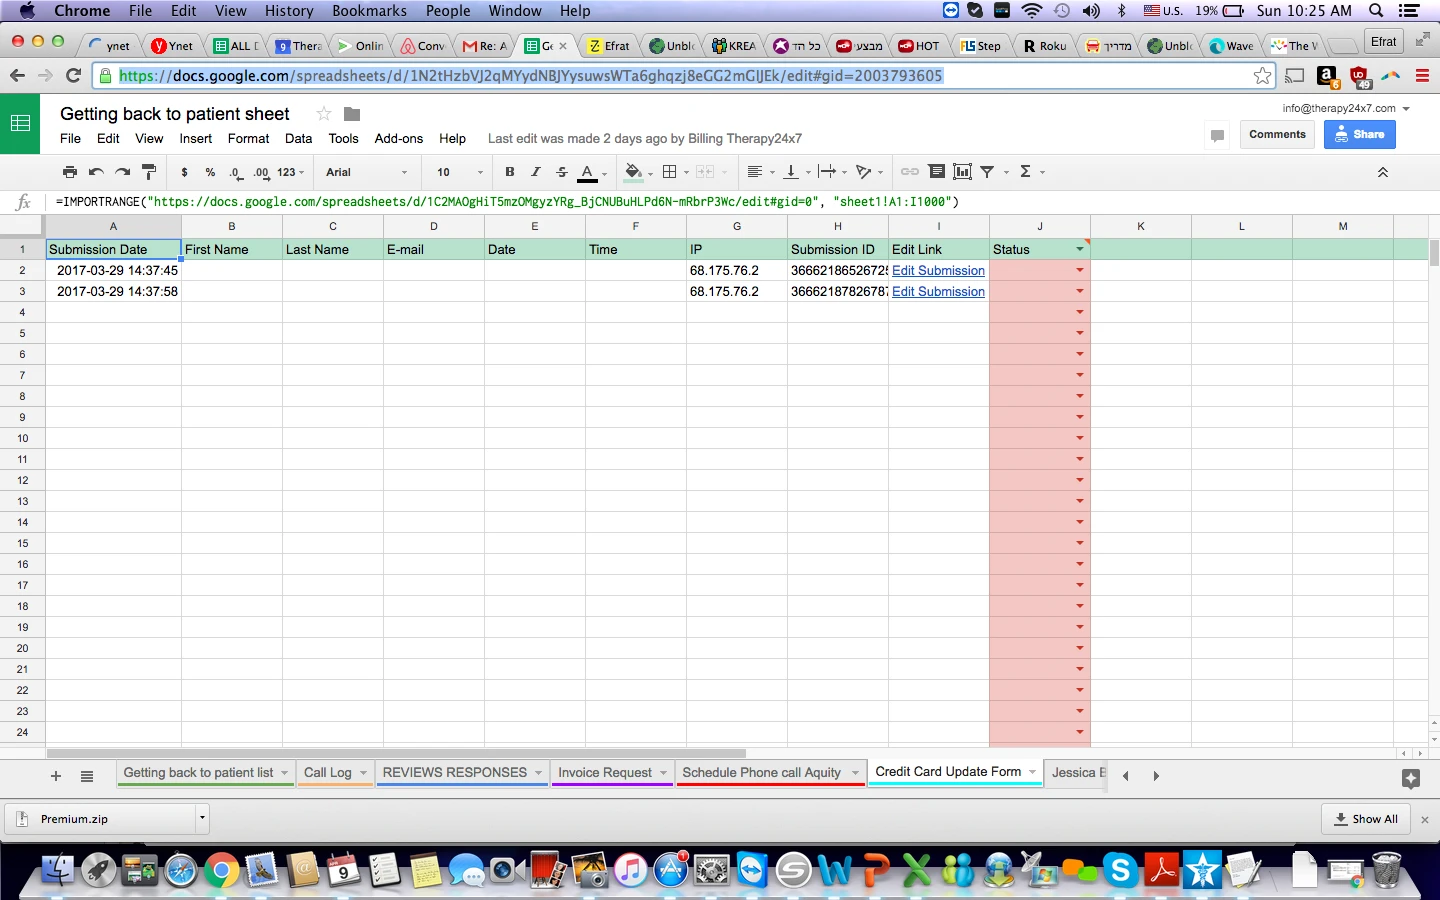 The name and email fields dont show up in Google Sheet Image 1 Screenshot 20